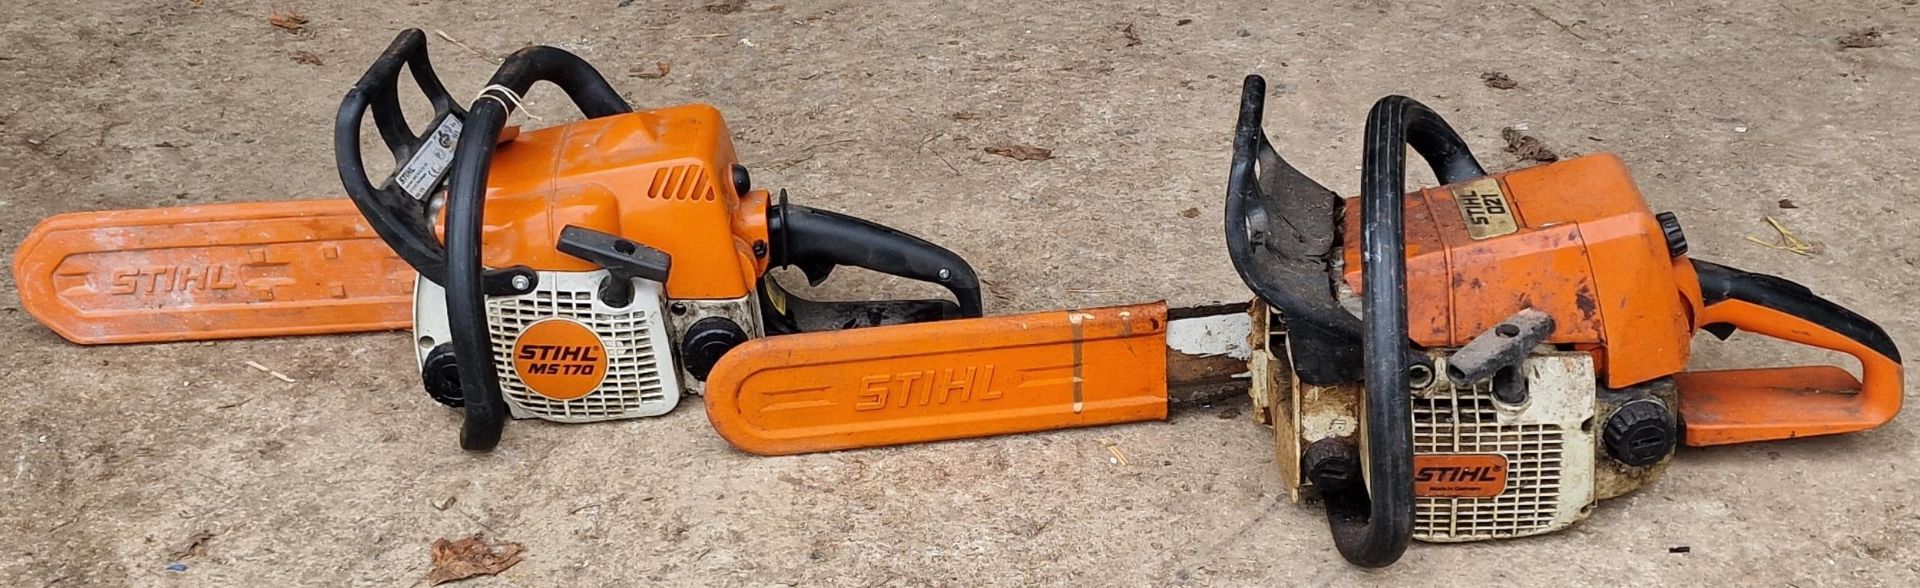 Stihl MS170 chainsaw together with a Stihl 021 chainsaw (2) - Image 2 of 2